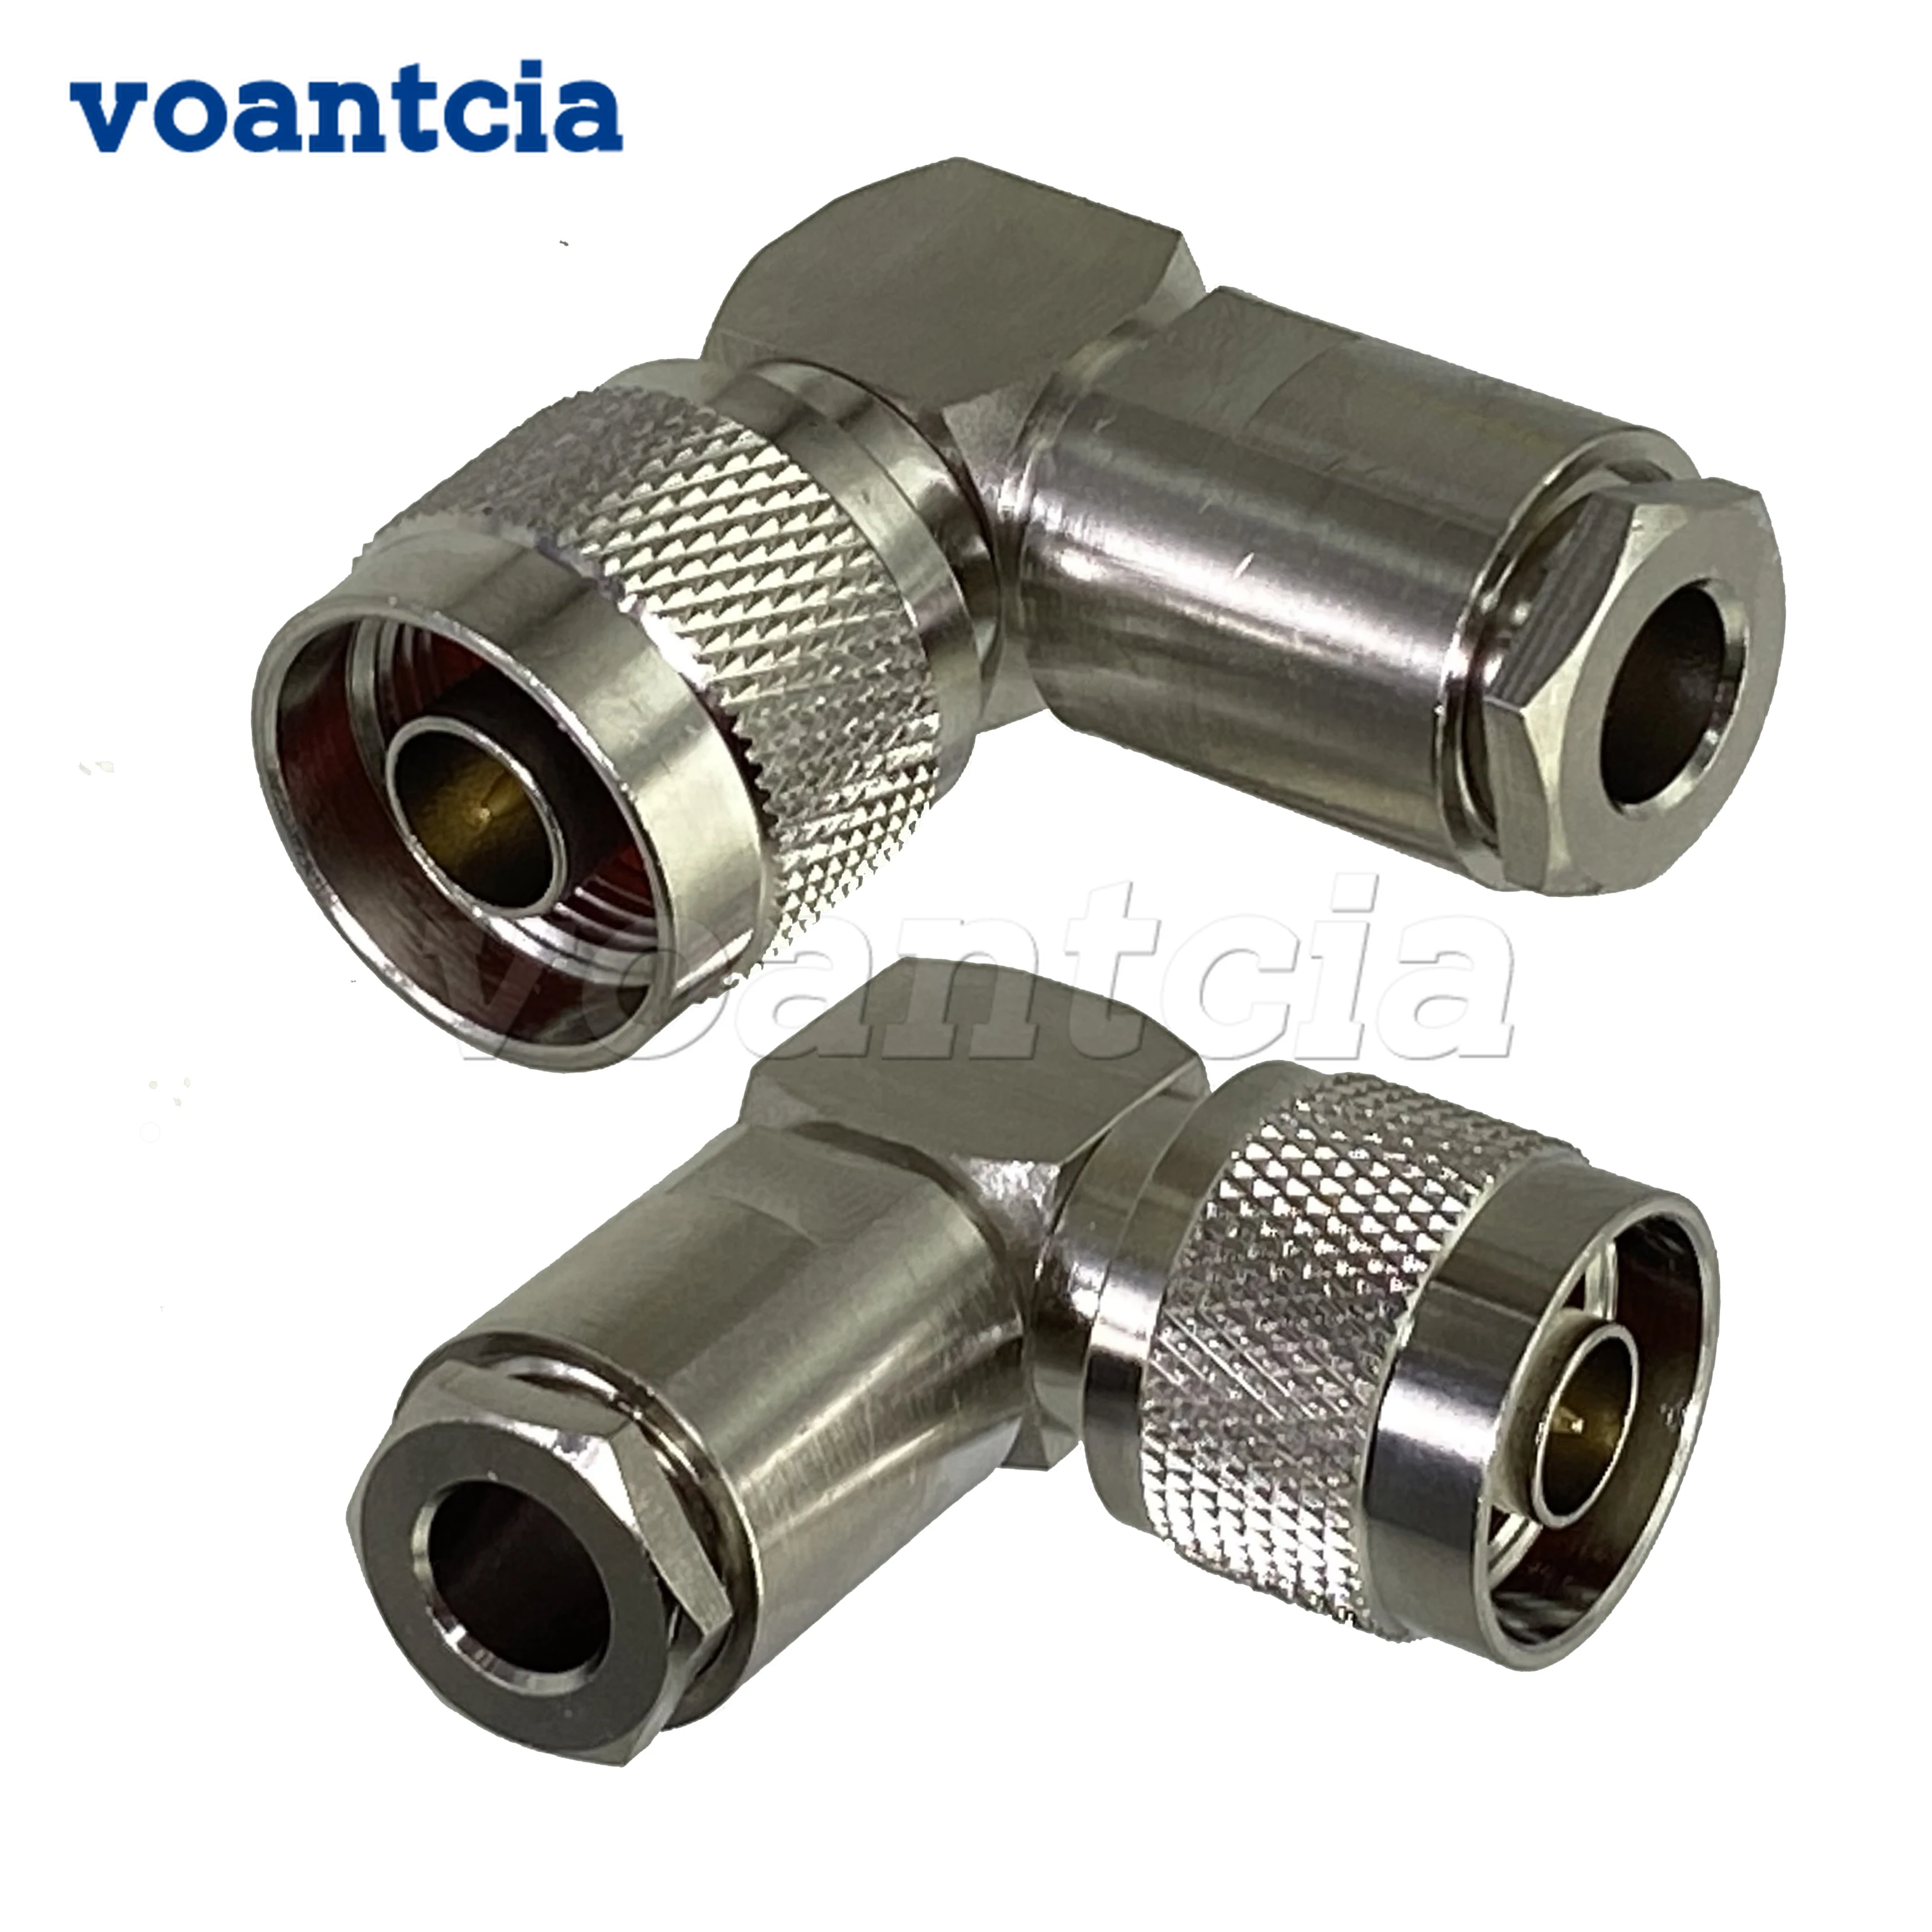 

10pcs N Male Plug Connector Clamp RG5 RG6 5D-FB LMR300 Cable RF Coaxial Brass Right Angle Wire Terminals New